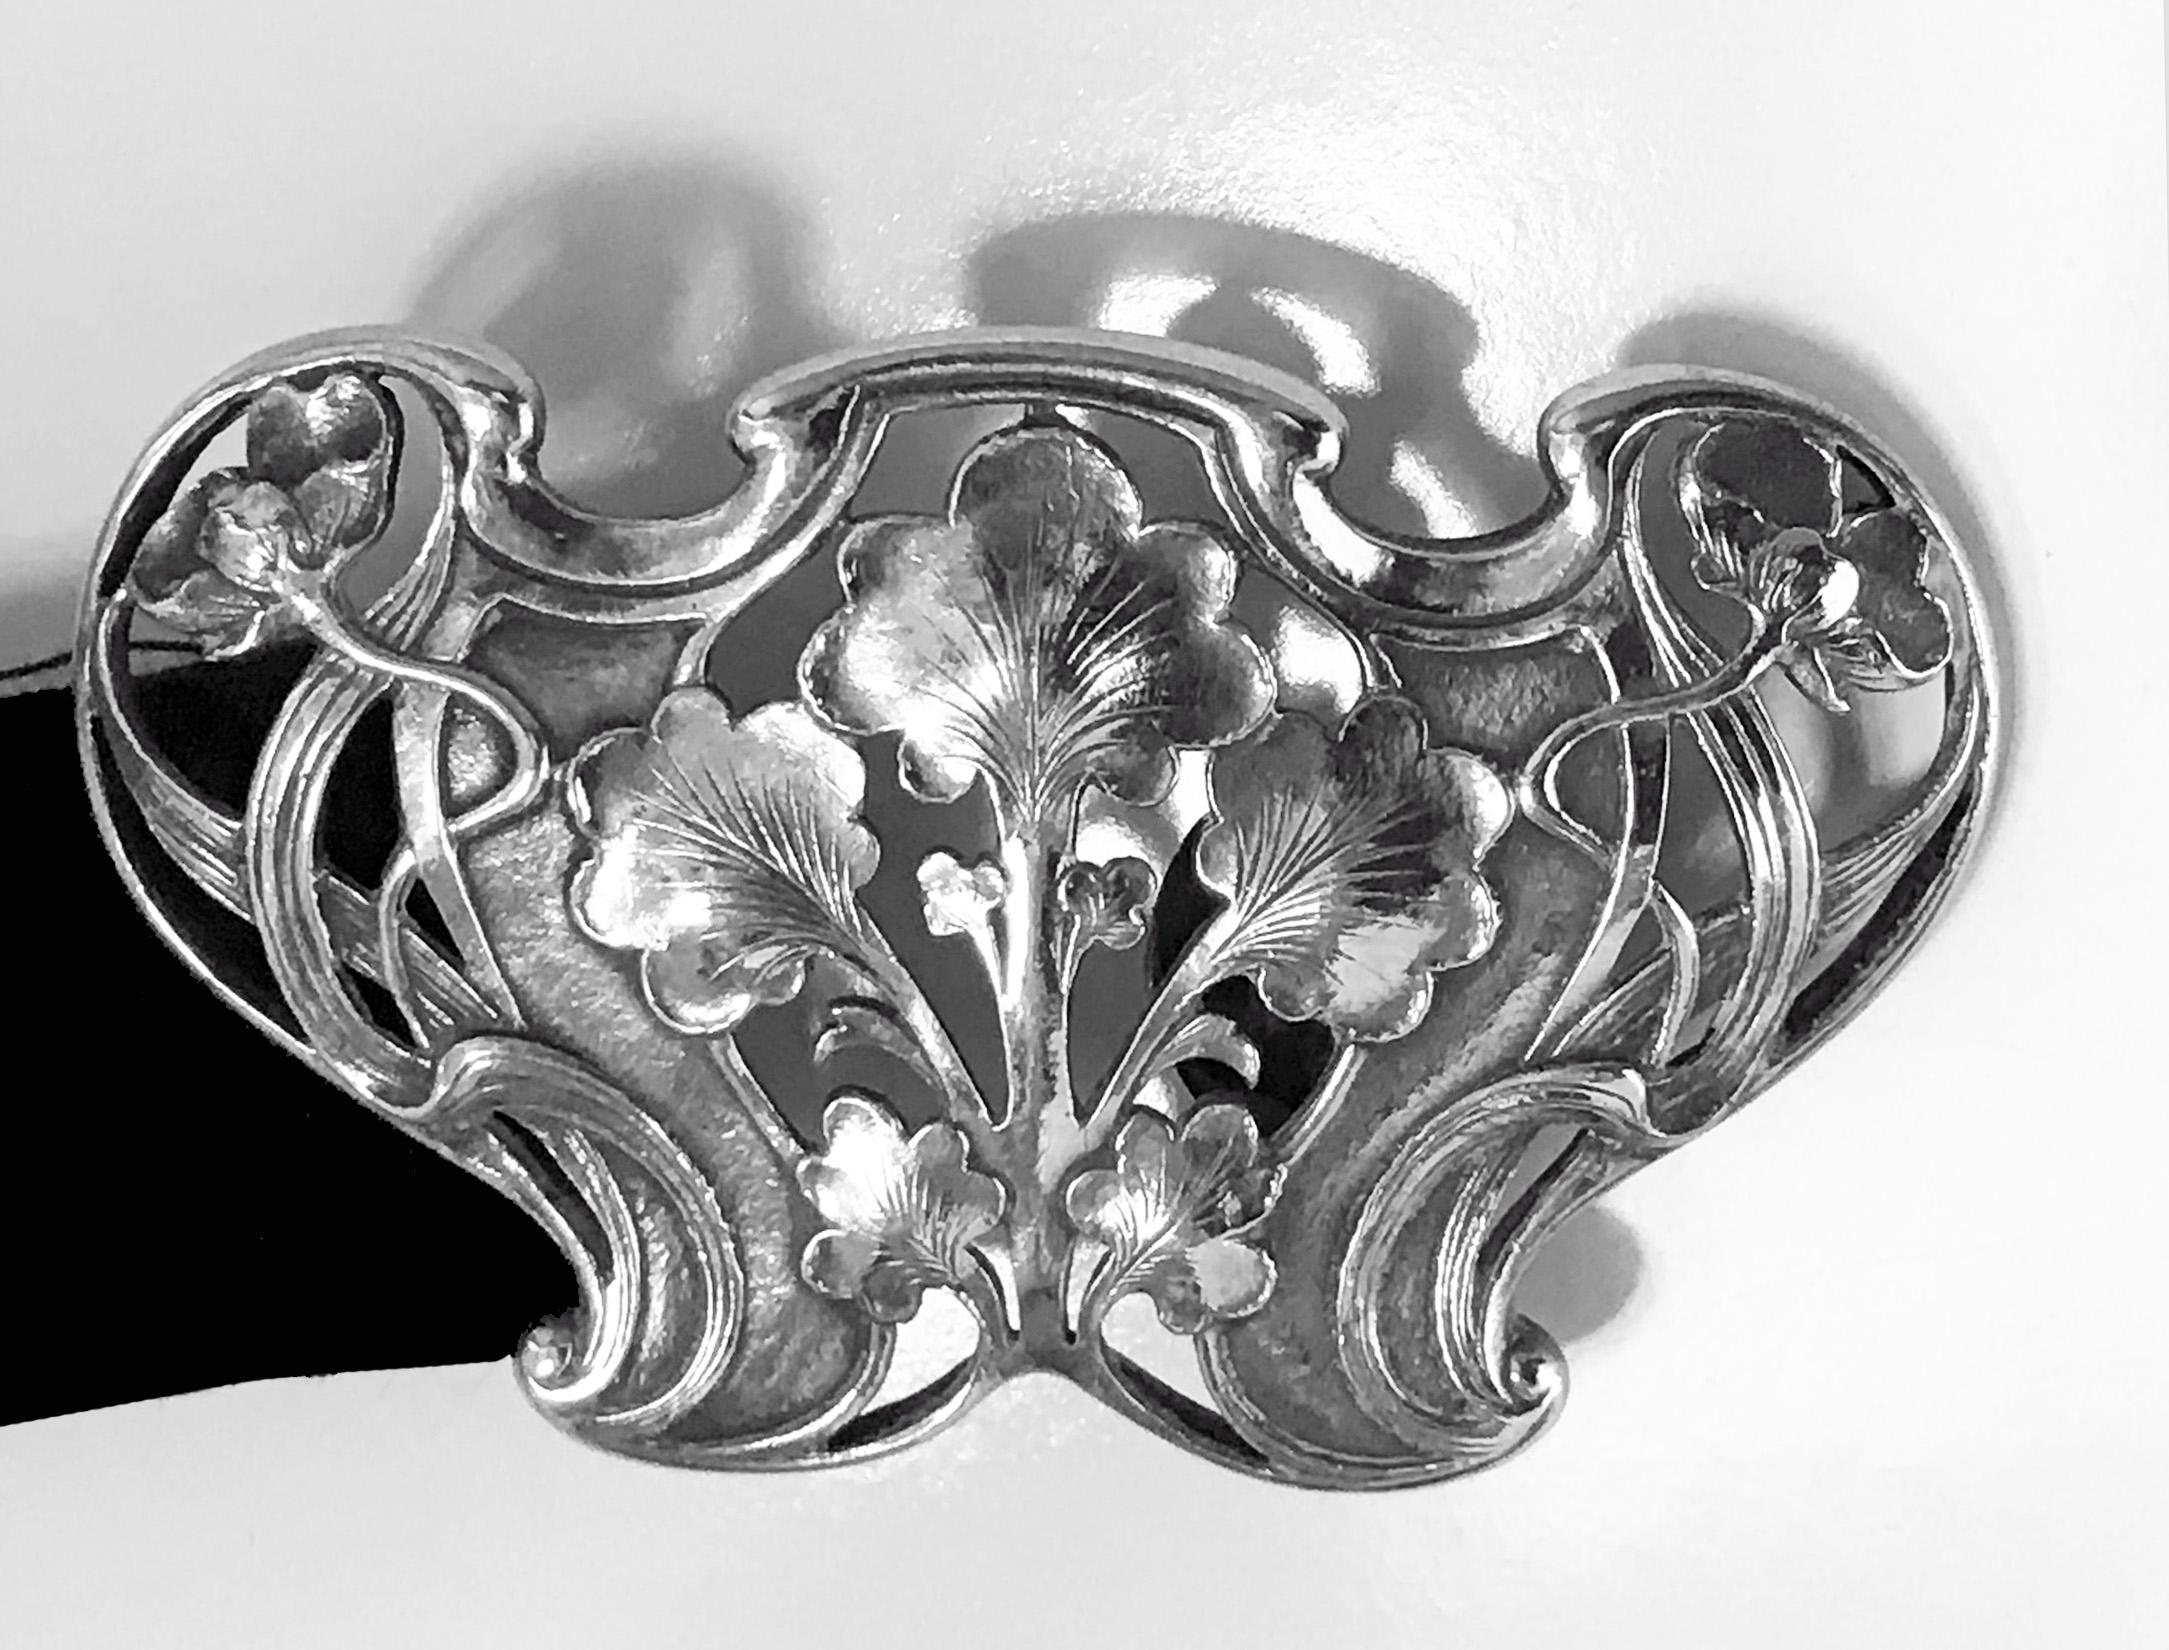 Gorham Art Nouveau sterling buckle, 1902. Marks for Gorham Sterling and B1949 copyrighted with 1902 (year). Beautiful open floral nouveau whiplash design against stippled background. Measures: 2.75 x 1.75 inches.